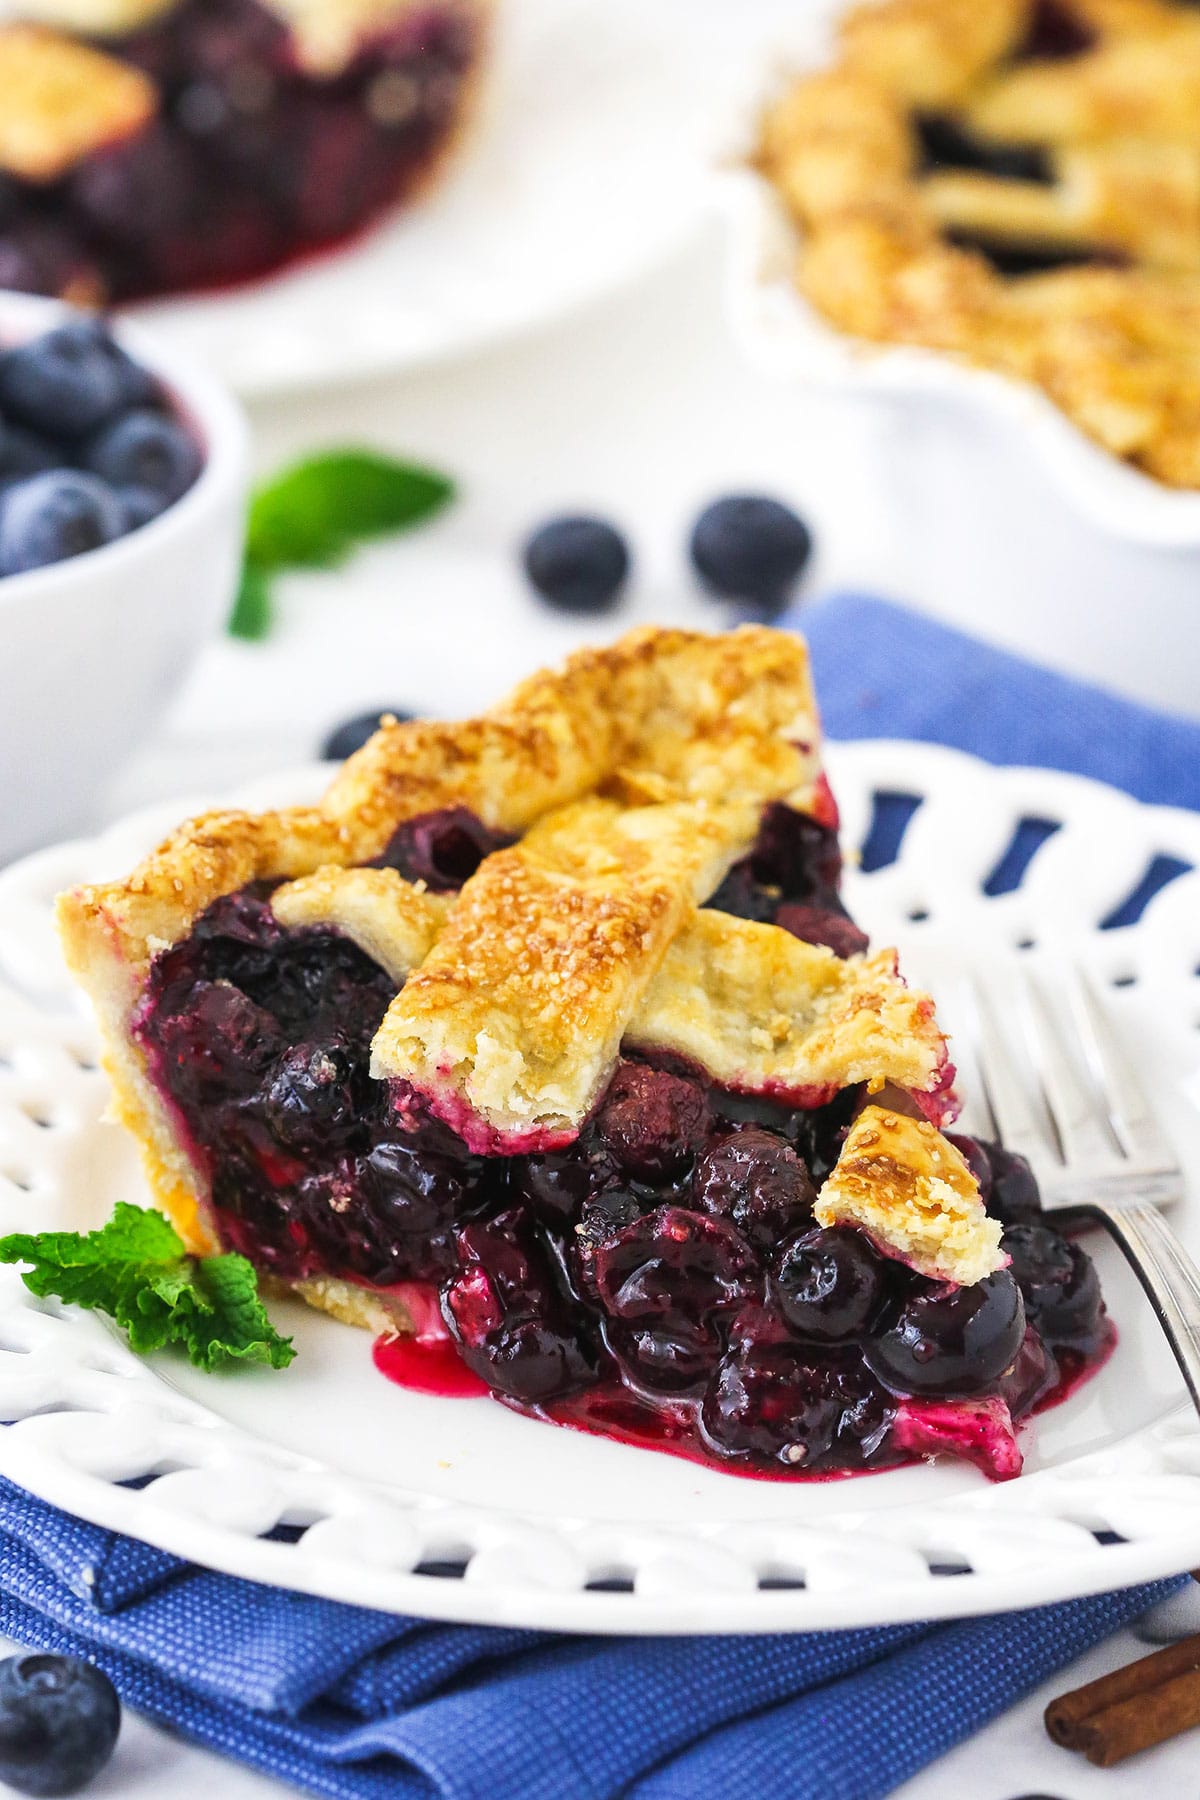 A slice of blueberry pie on a plate with a mint leaf and a fork